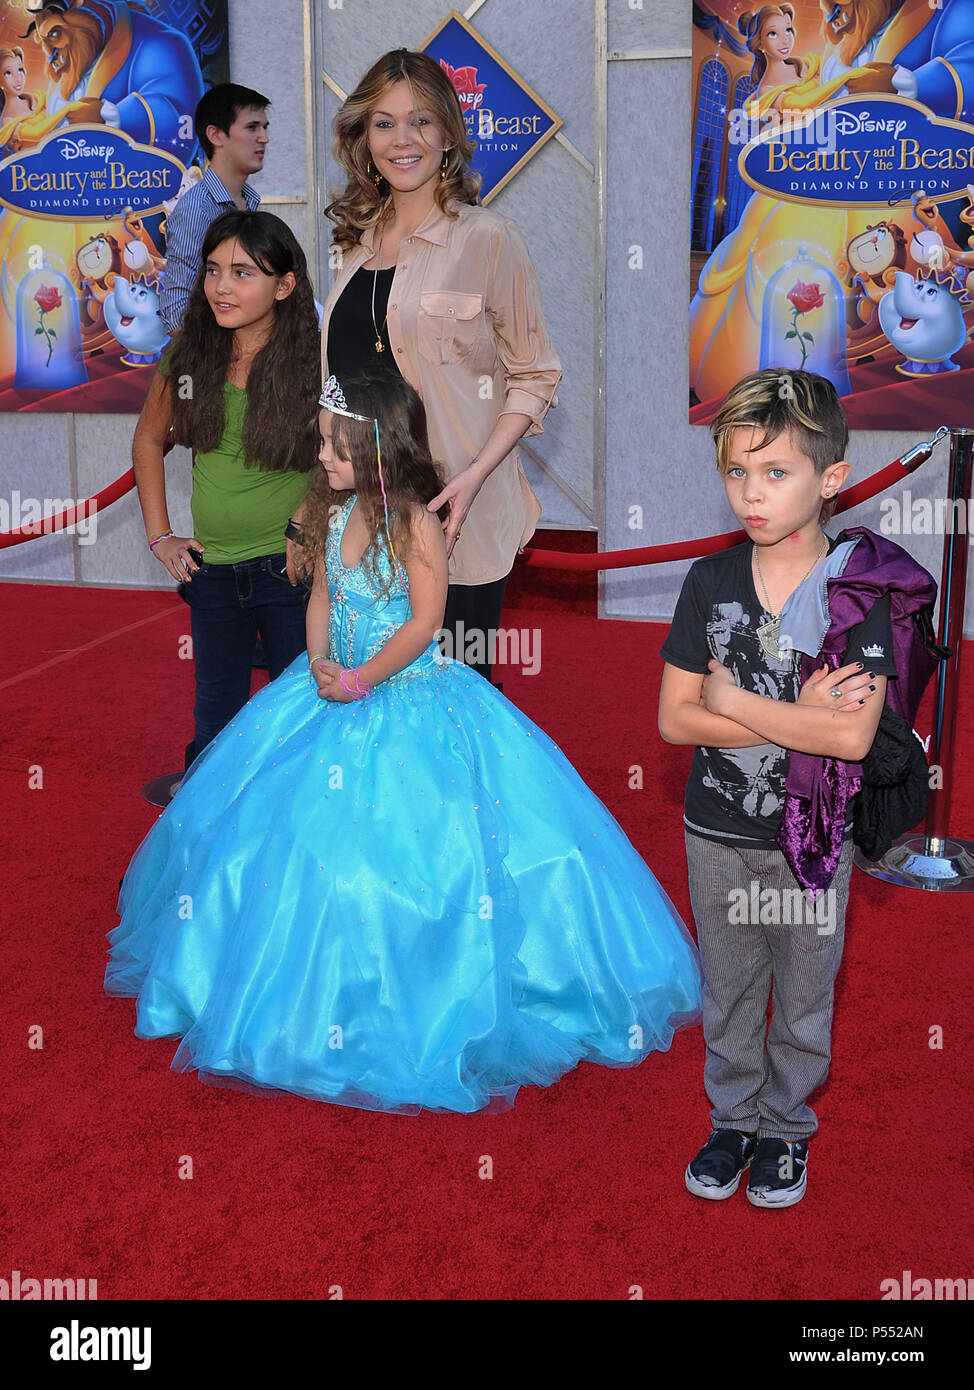 Shanna Moekler with dauhgters and son The Beauty and The Beast DVD / Blue Ray release at El Capitan Theatre In Los Angeles.Shanna Moakler kids 32  Event in Hollywood Life - California, Red Carpet Event, USA, Film Industry, Celebrities, Photography, Bestof, Arts Culture and Entertainment, Celebrities fashion, Best of, Hollywood Life, Event in Hollywood Life - California, Red Carpet and backstage, Music celebrities, Topix, Couple, family ( husband and wife ) and kids- Children, brothers and sisters inquiry tsuni@Gamma-USA.com, Credit Tsuni / USA, 2010 Stock Photo